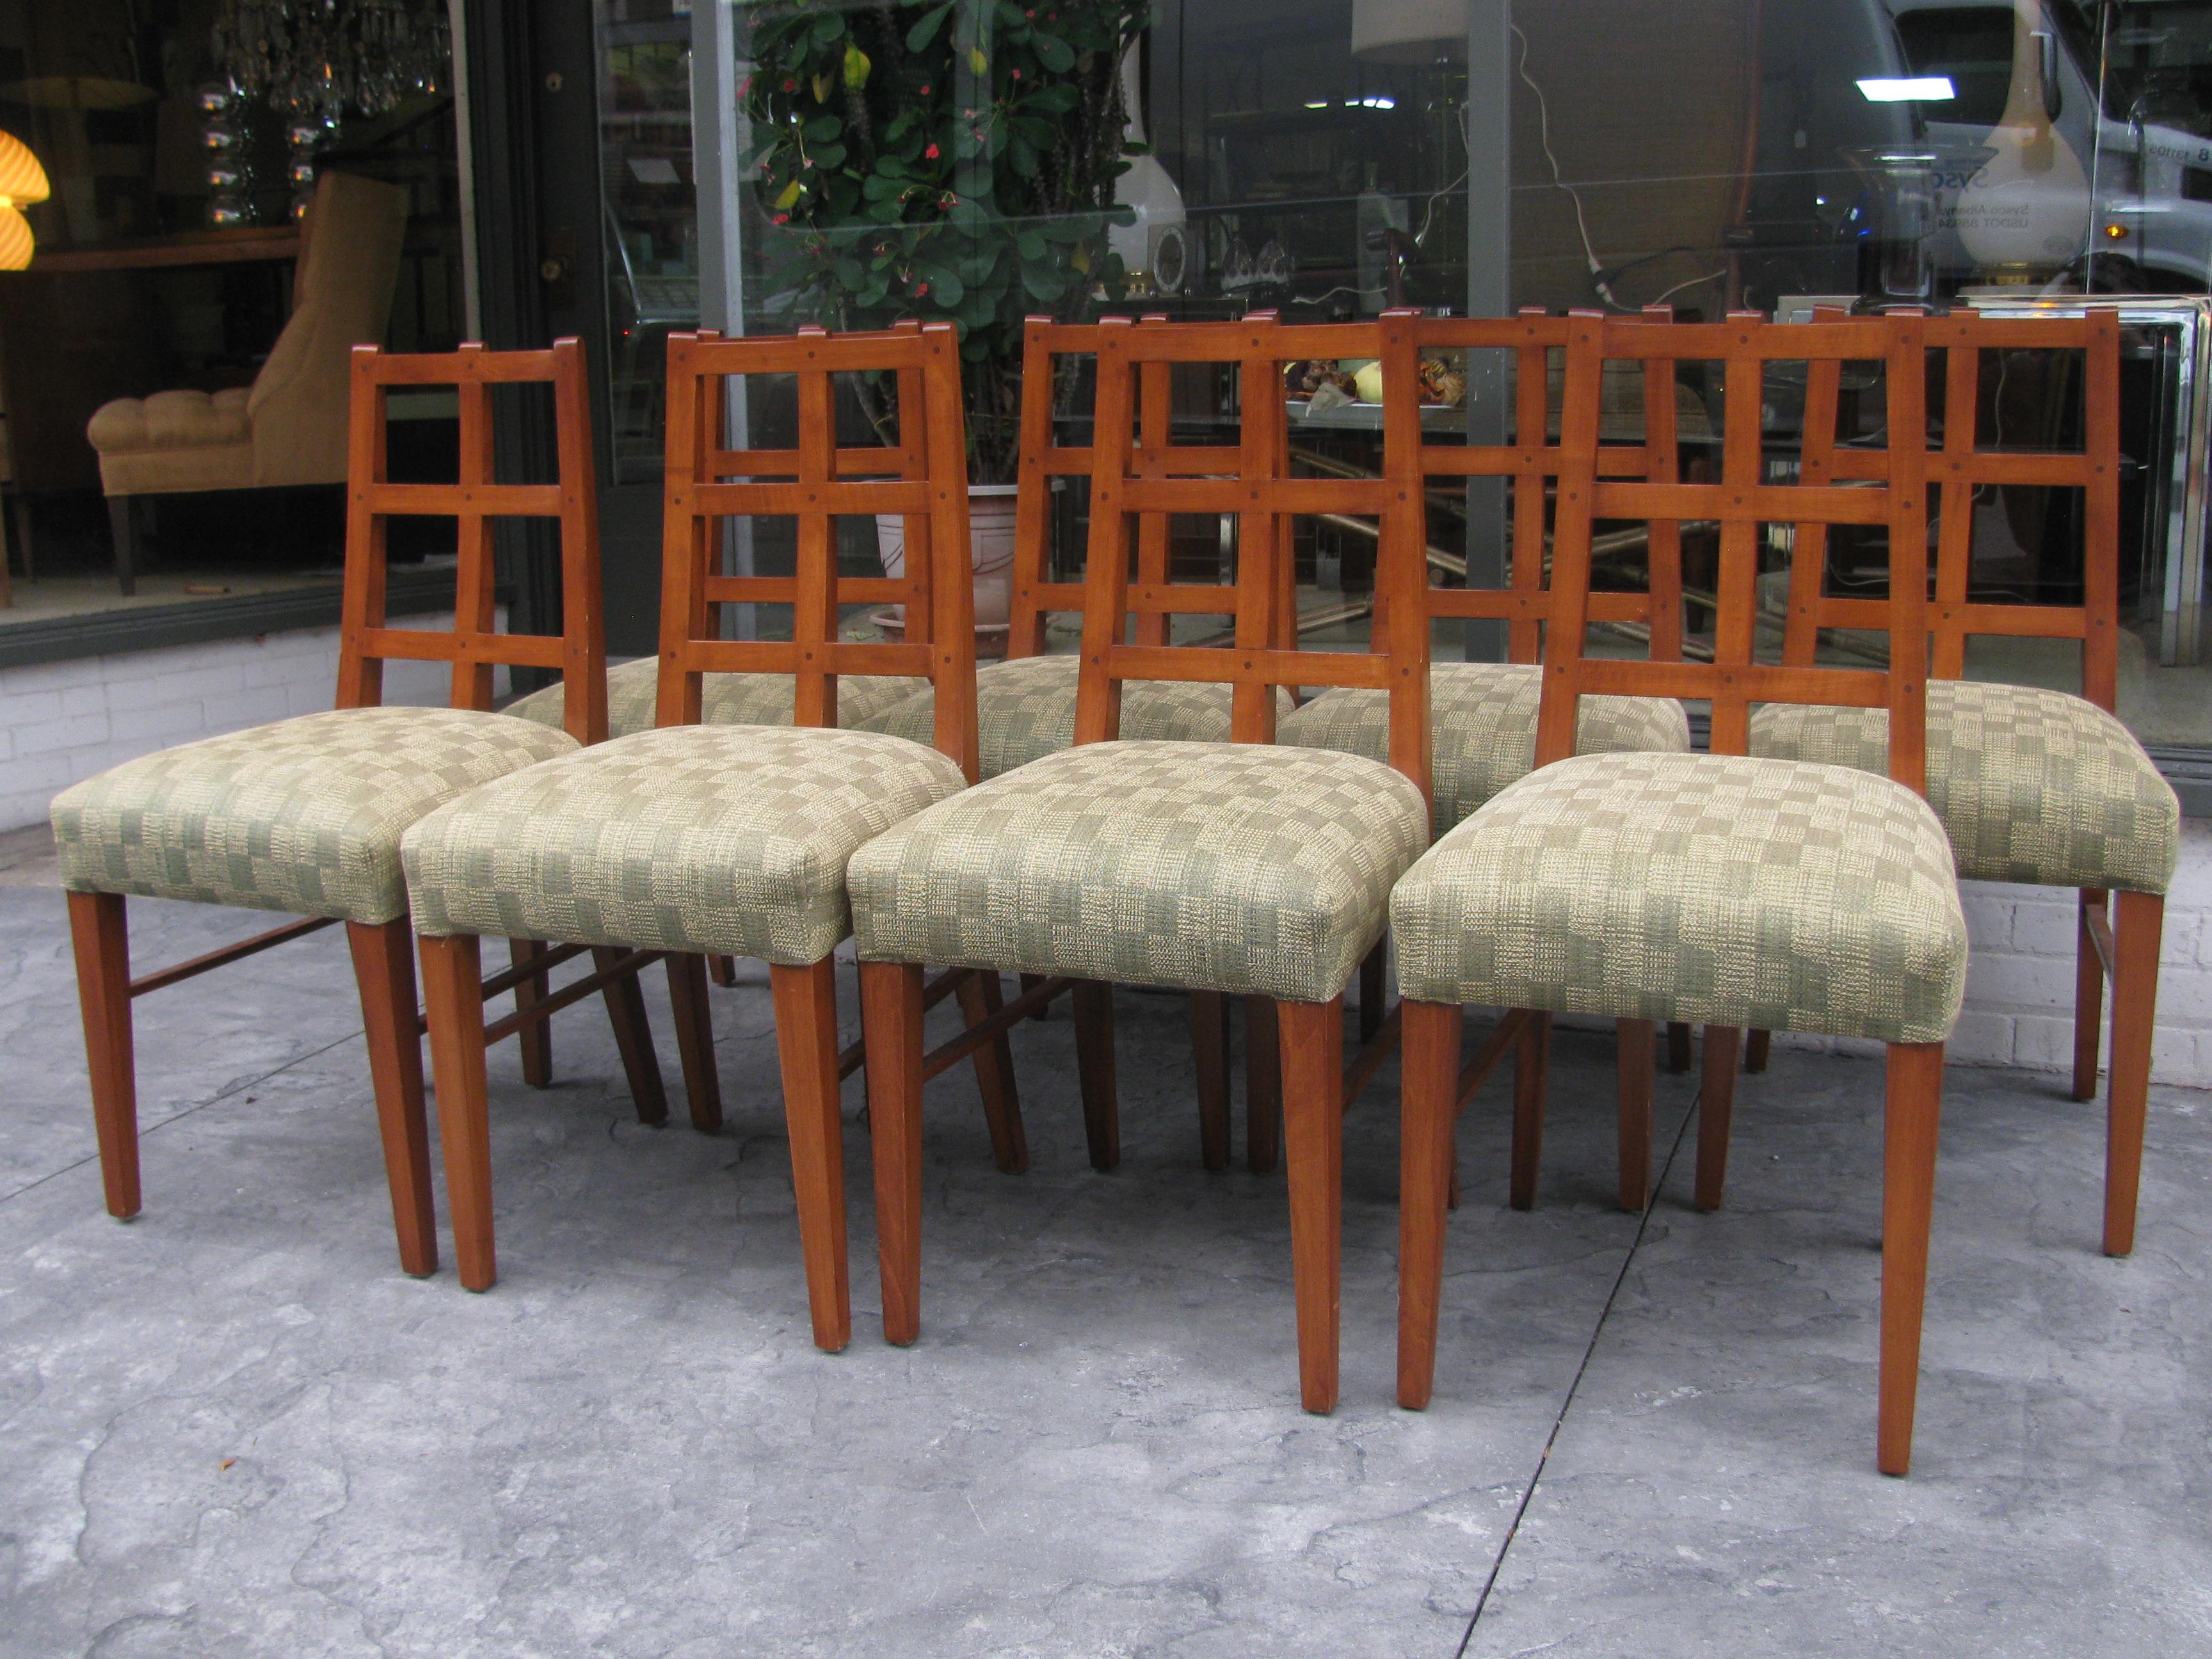 Exceptional set of custom made dining chairs all handmade and newly upholstered. Original design was for a NYC restaurant. Chairs are a blend of Arts & Crafts meets midcentury. Backs of the chairs cross sections are all pinned with wood pegs, just